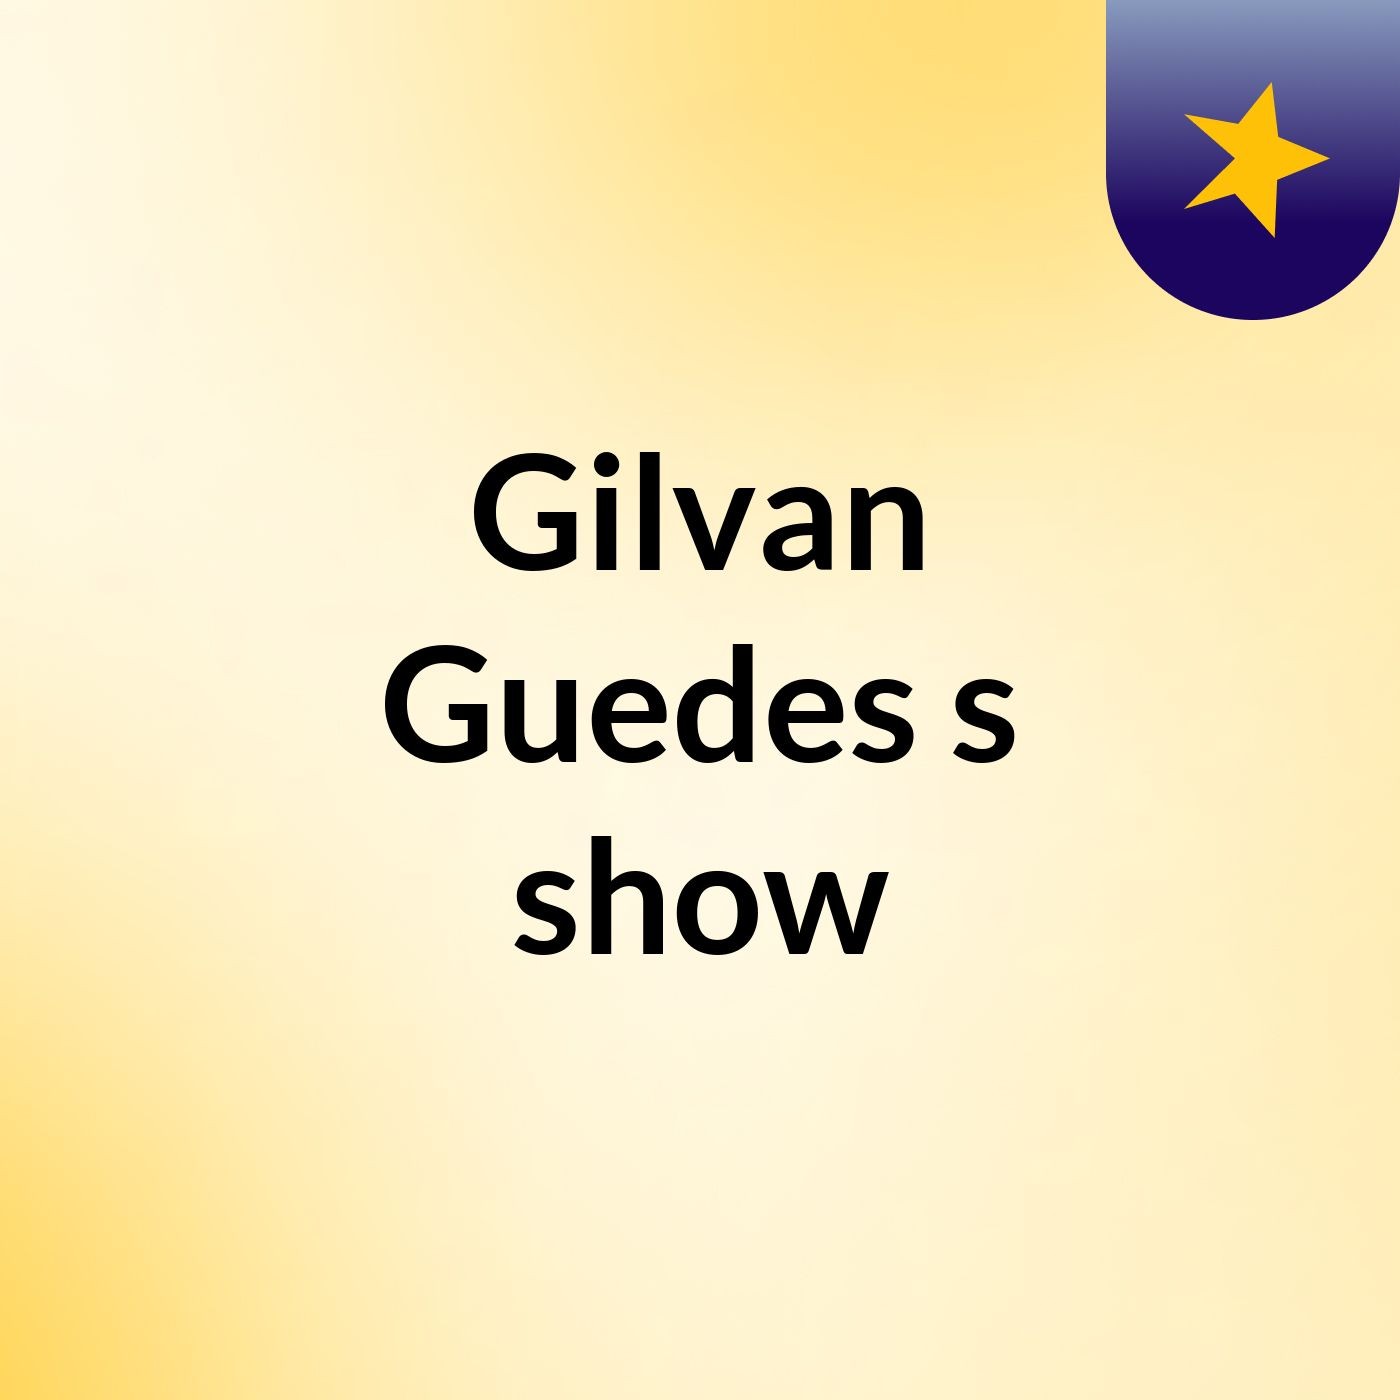 Gilvan Guedes's show